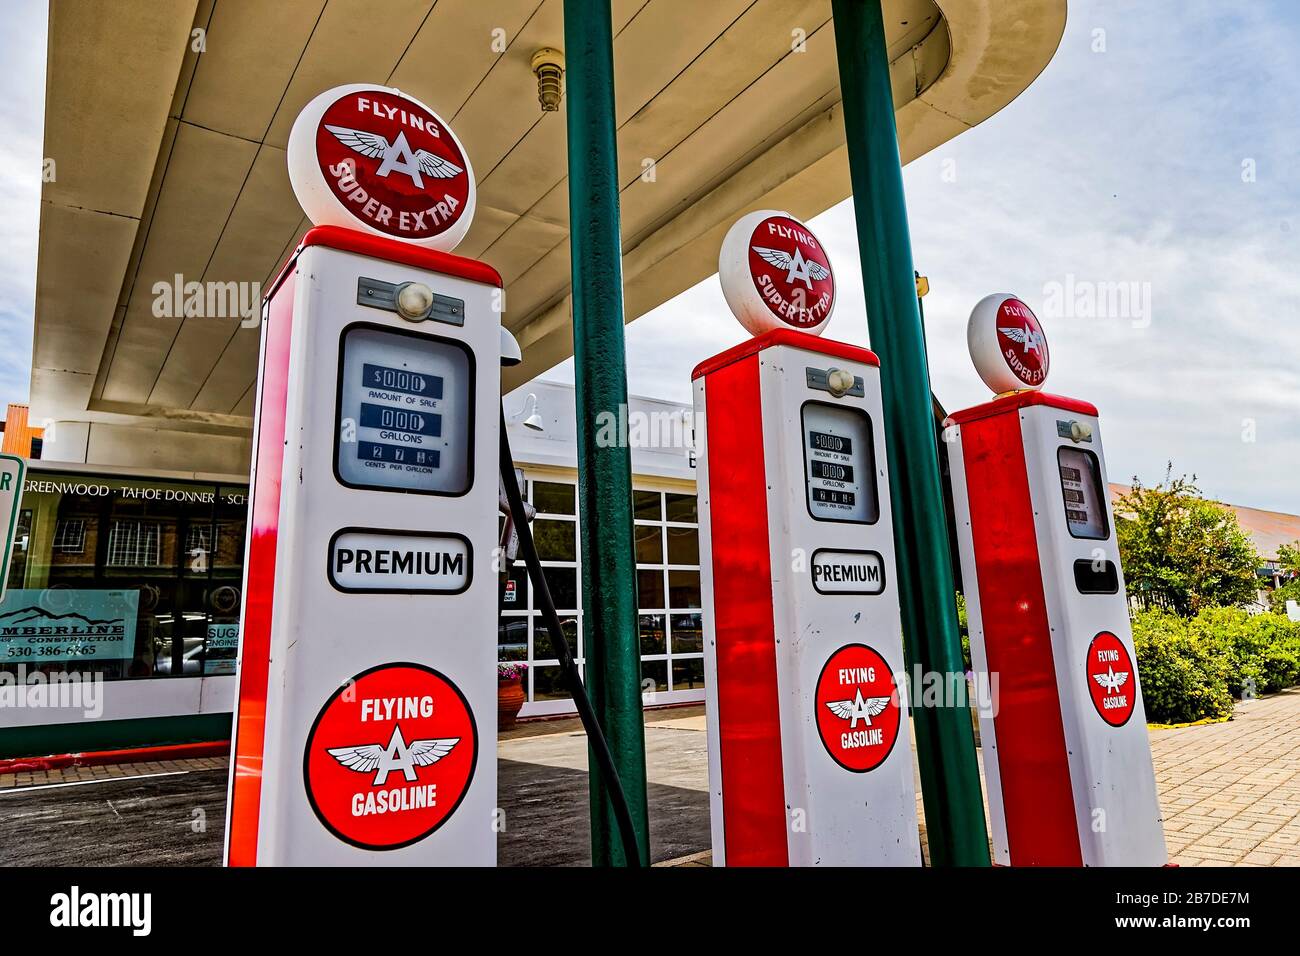 Flying A Super Extra Gas Pumps. Stock Photo